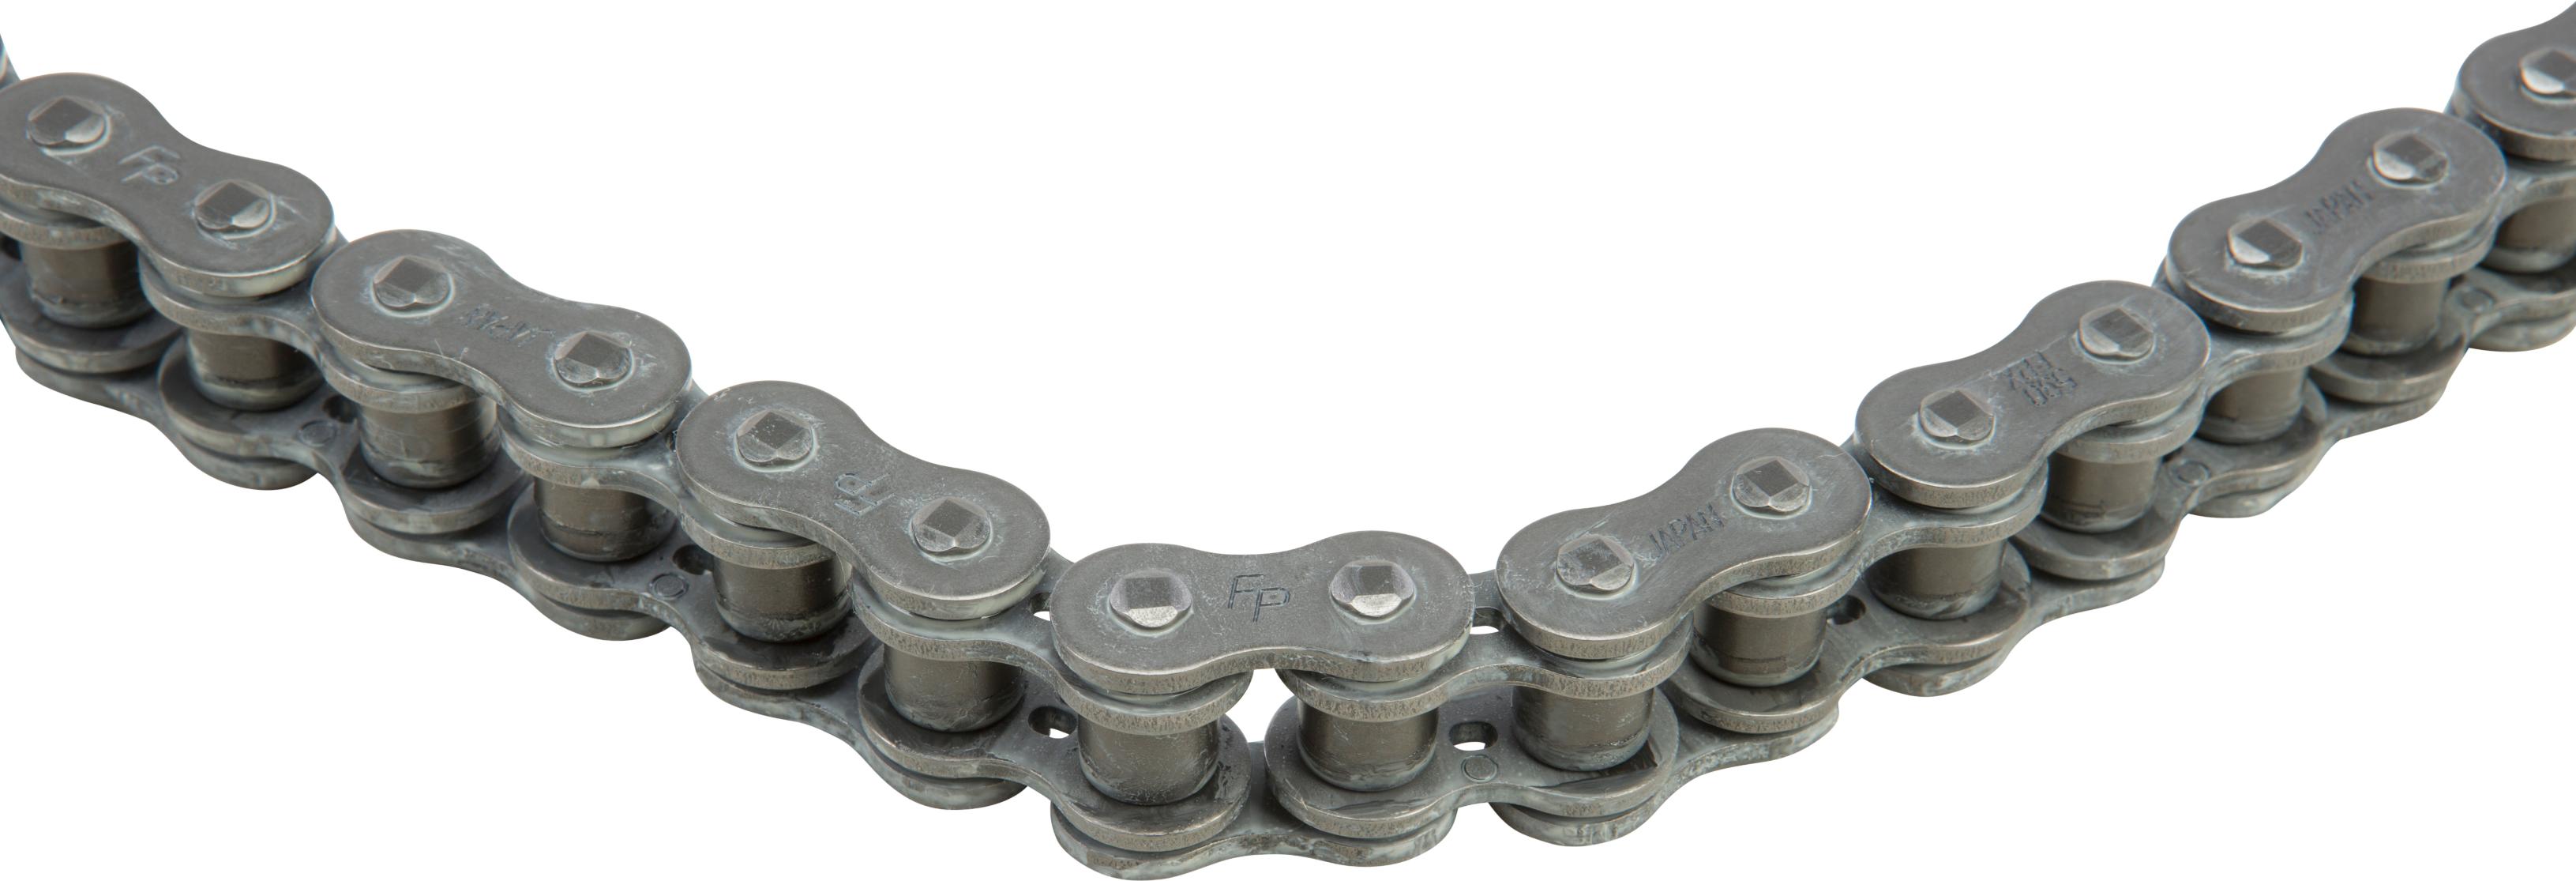 Fire Power - X-ring Chain 530x150 - 530FPX-150